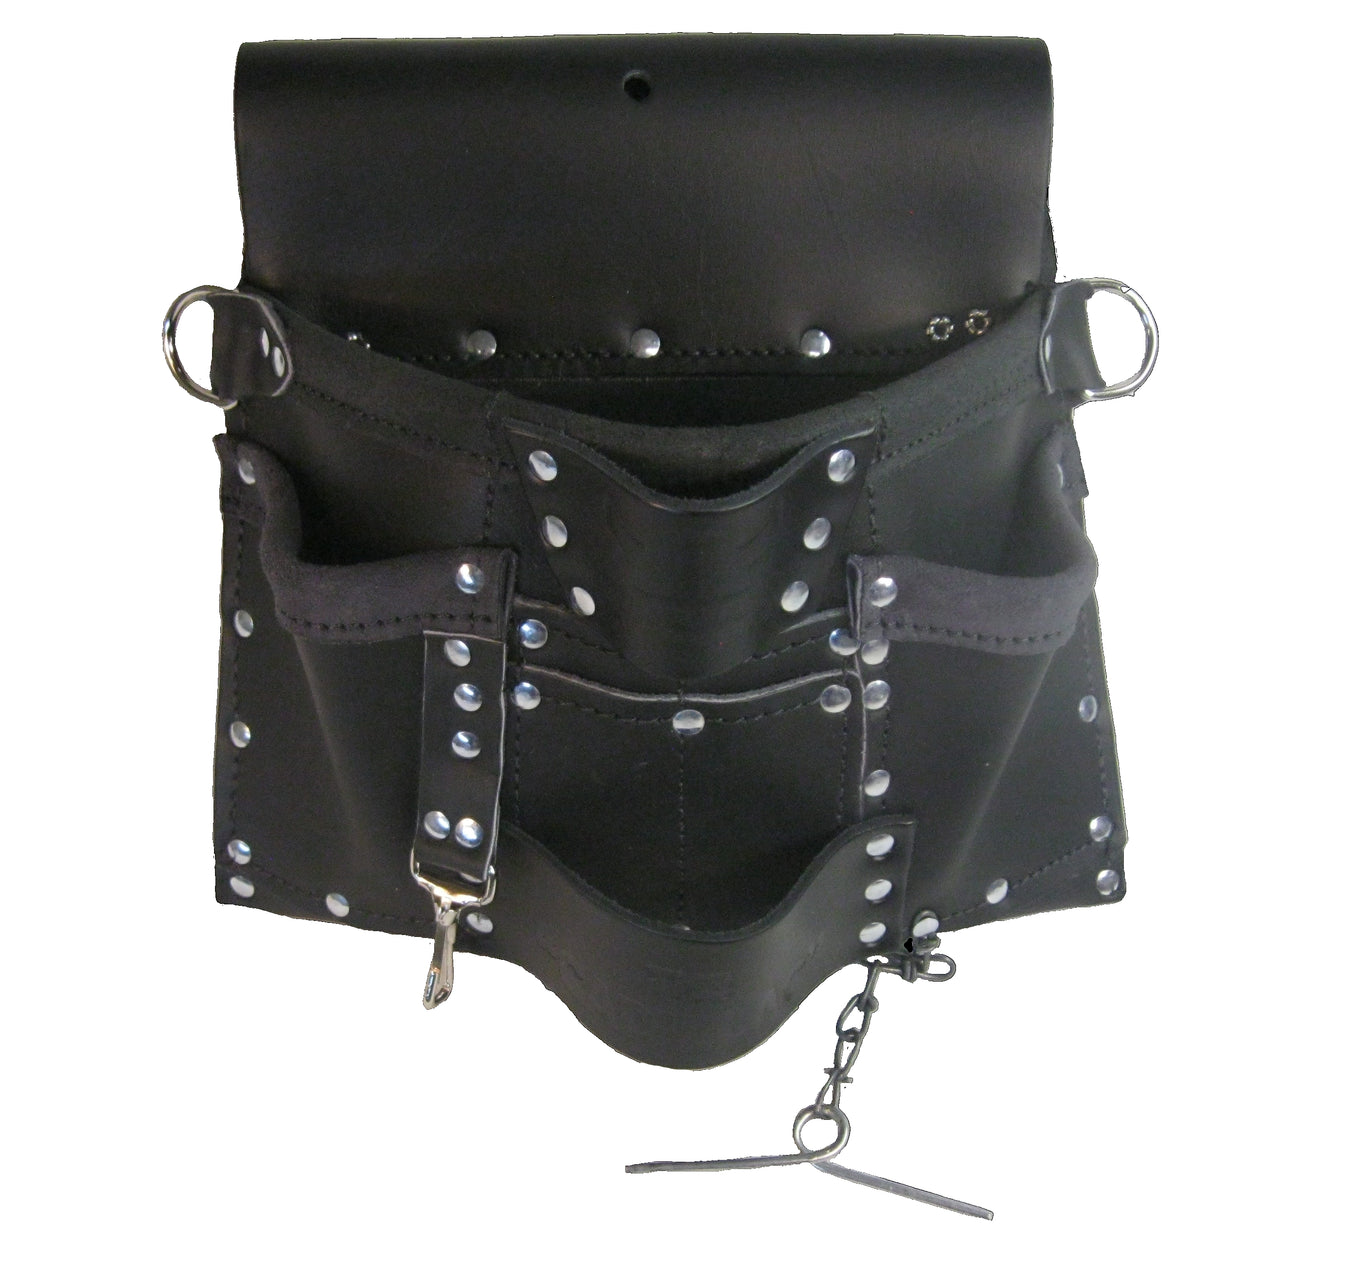 Tool Belts - Tool Pouches - Tool Aprons - At Viking Leather